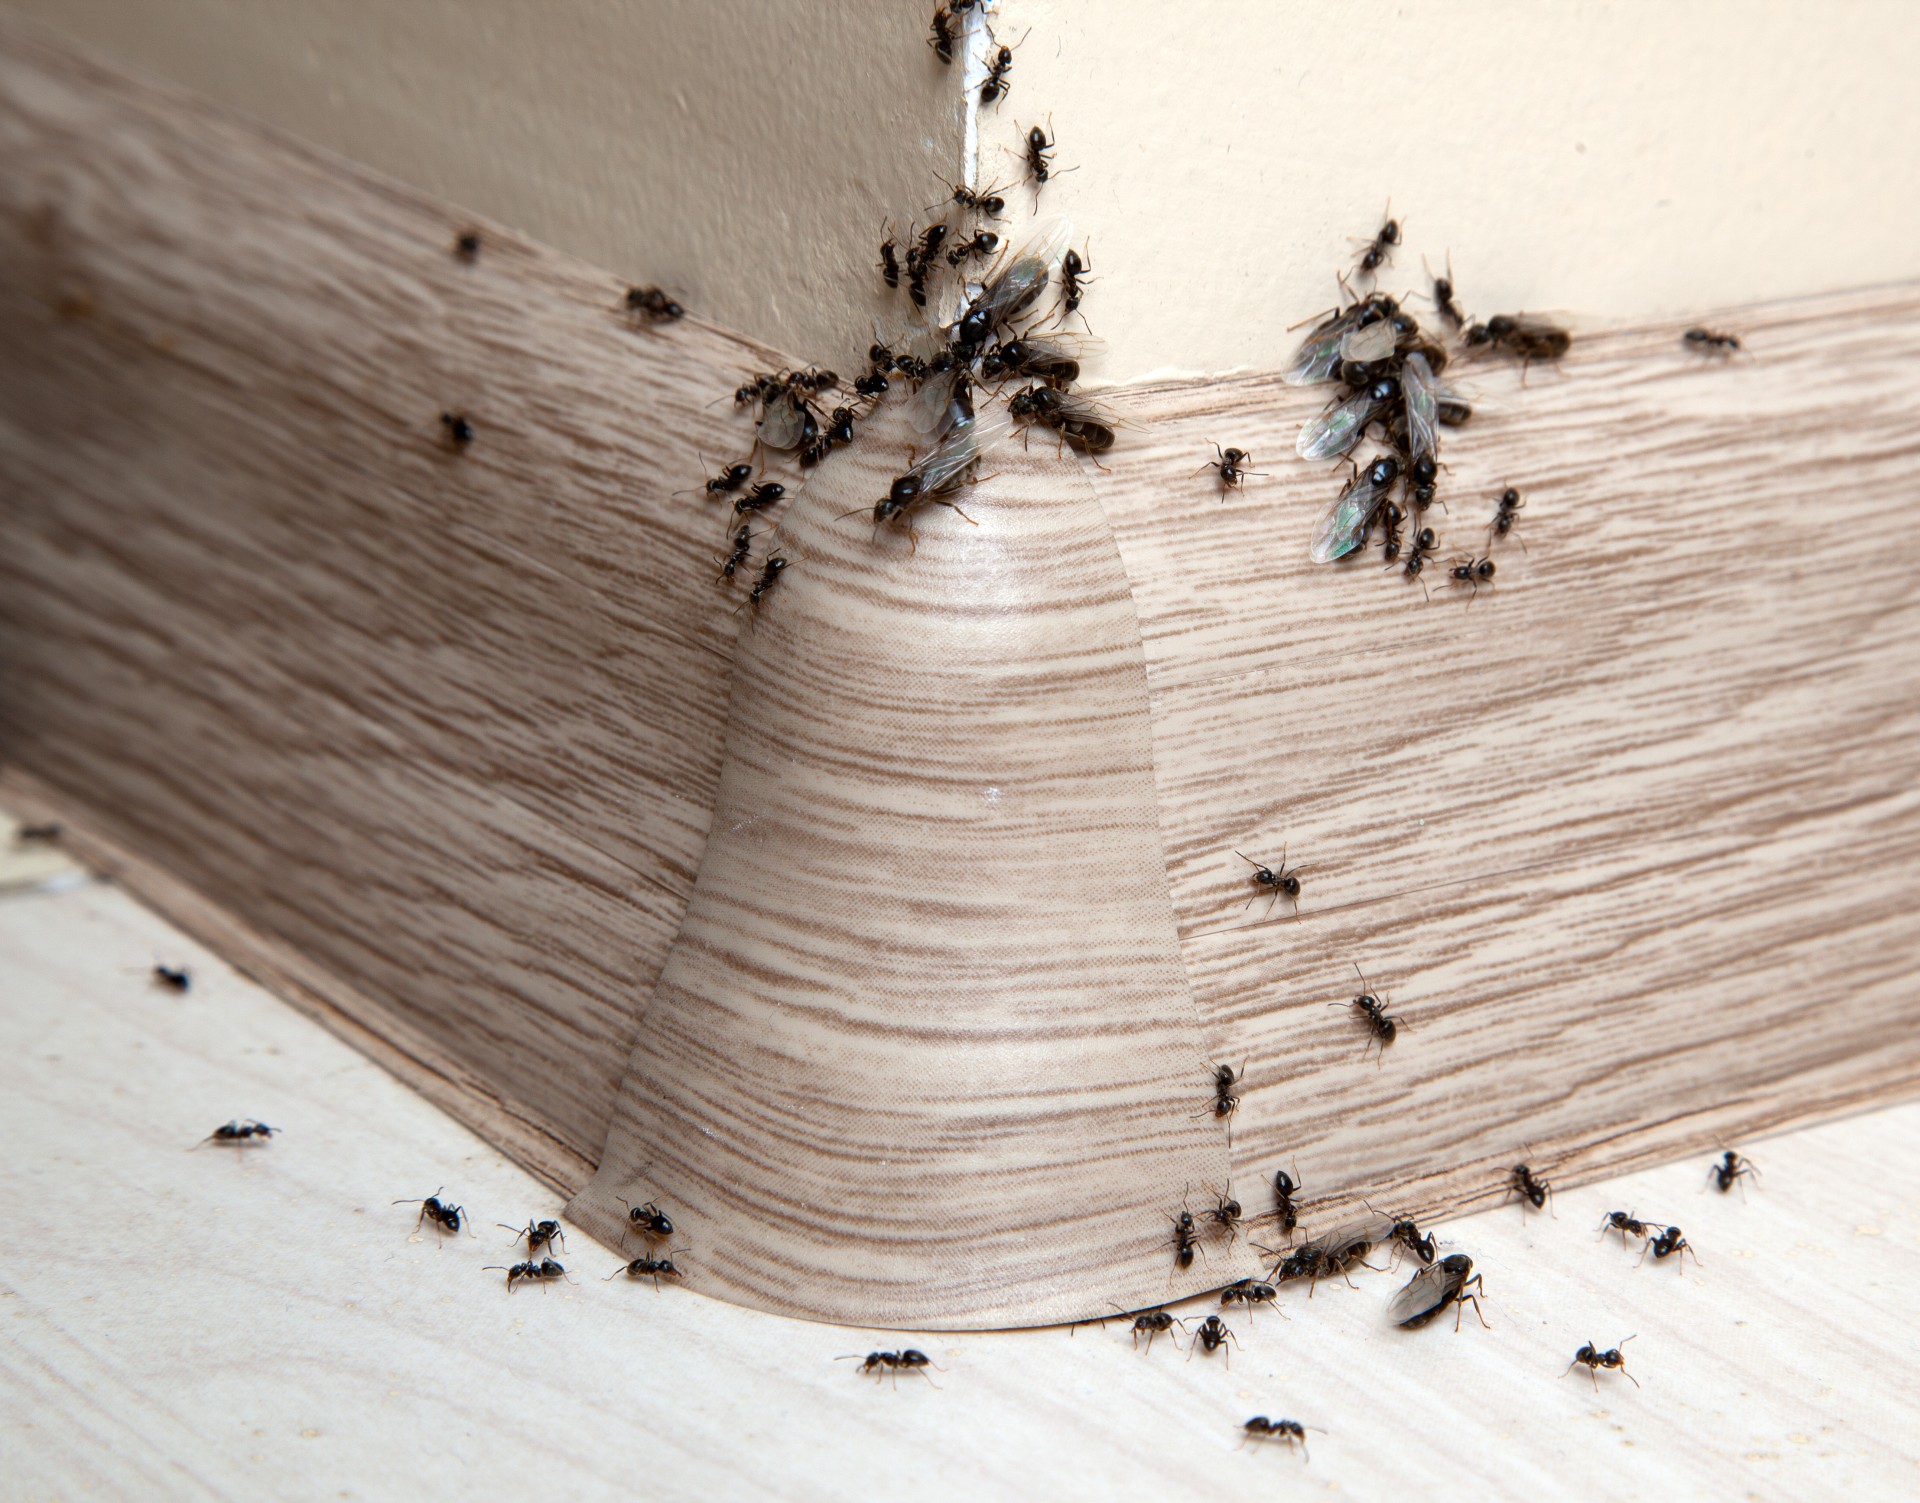 Ant Infestation, Pest Control in Swanley, Hextable, Crockenhill, BR8. Call Now 020 8166 9746